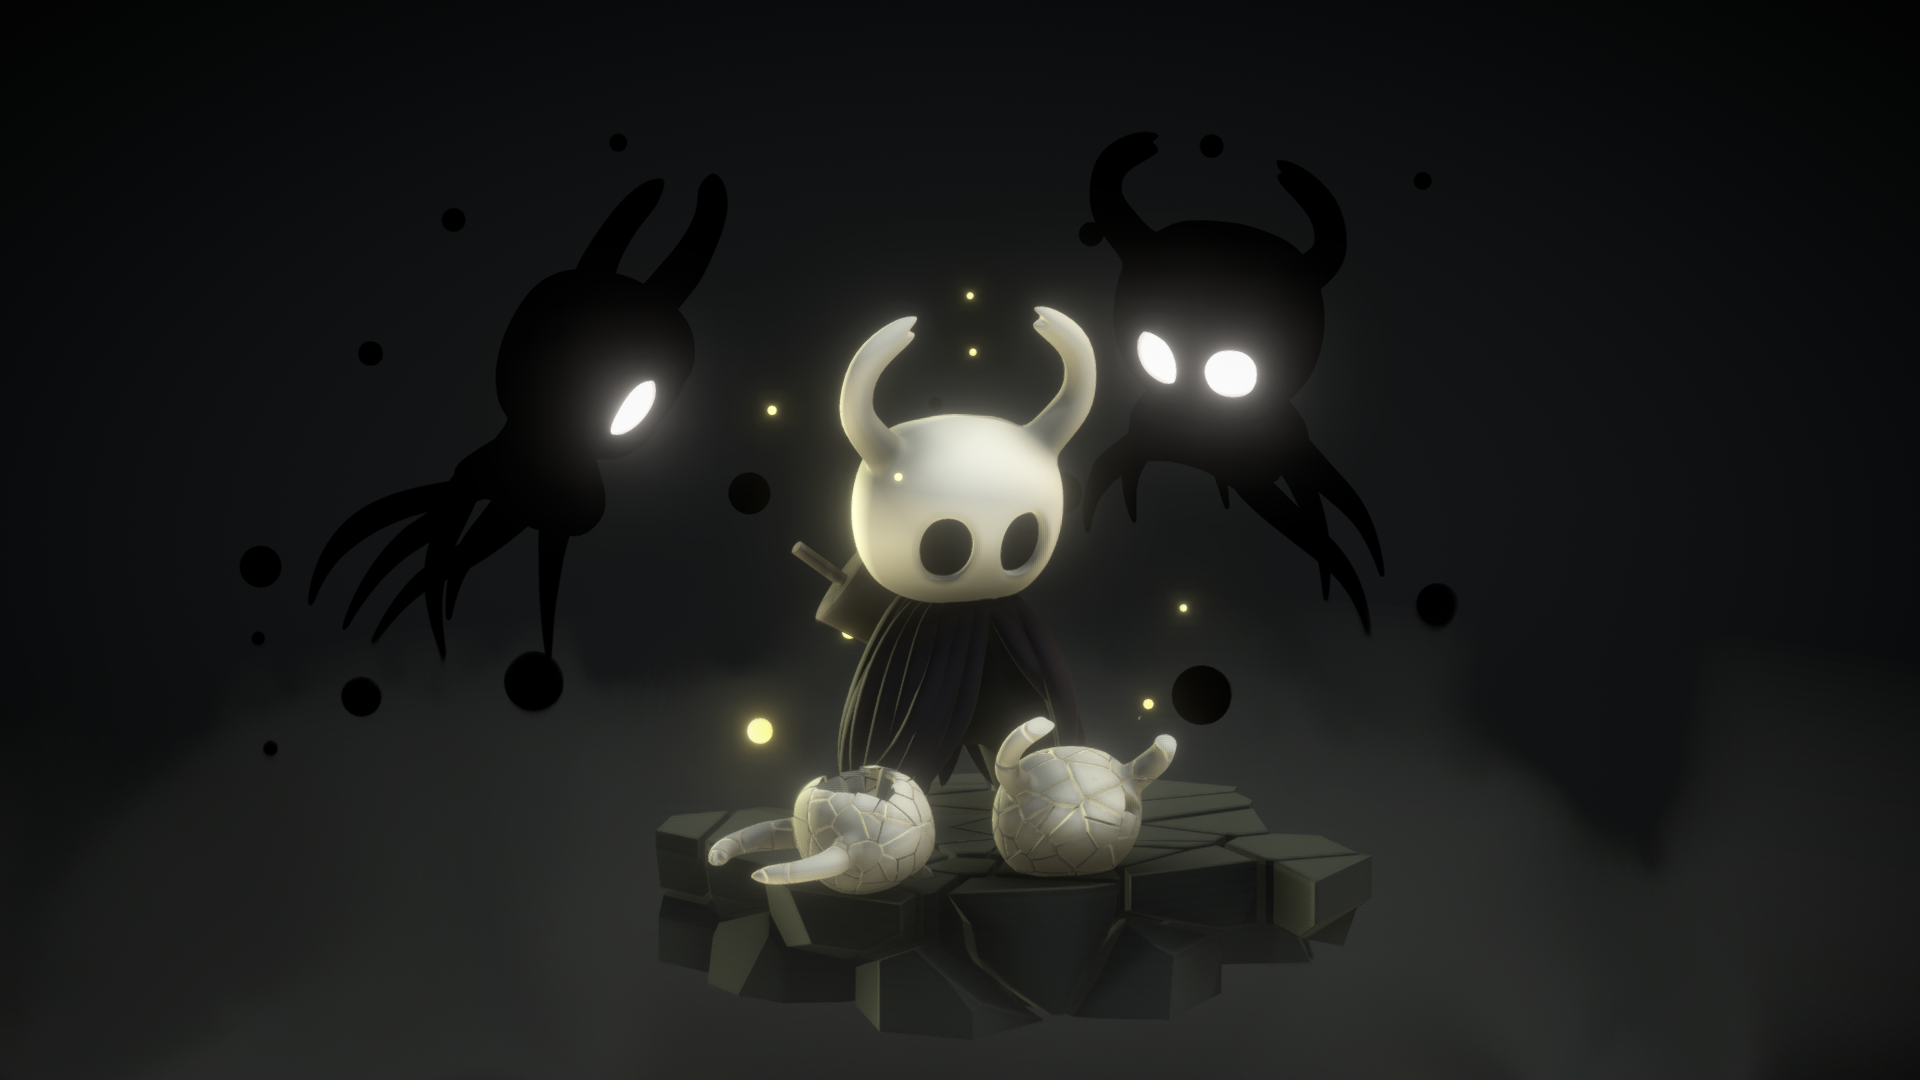 This model can be viewed in 3d on my sketchfab account  https://sketchfab.com/3d-models/echos-of-a-previous-life-hollow-knight-dc66e934614d468596625a93689192da